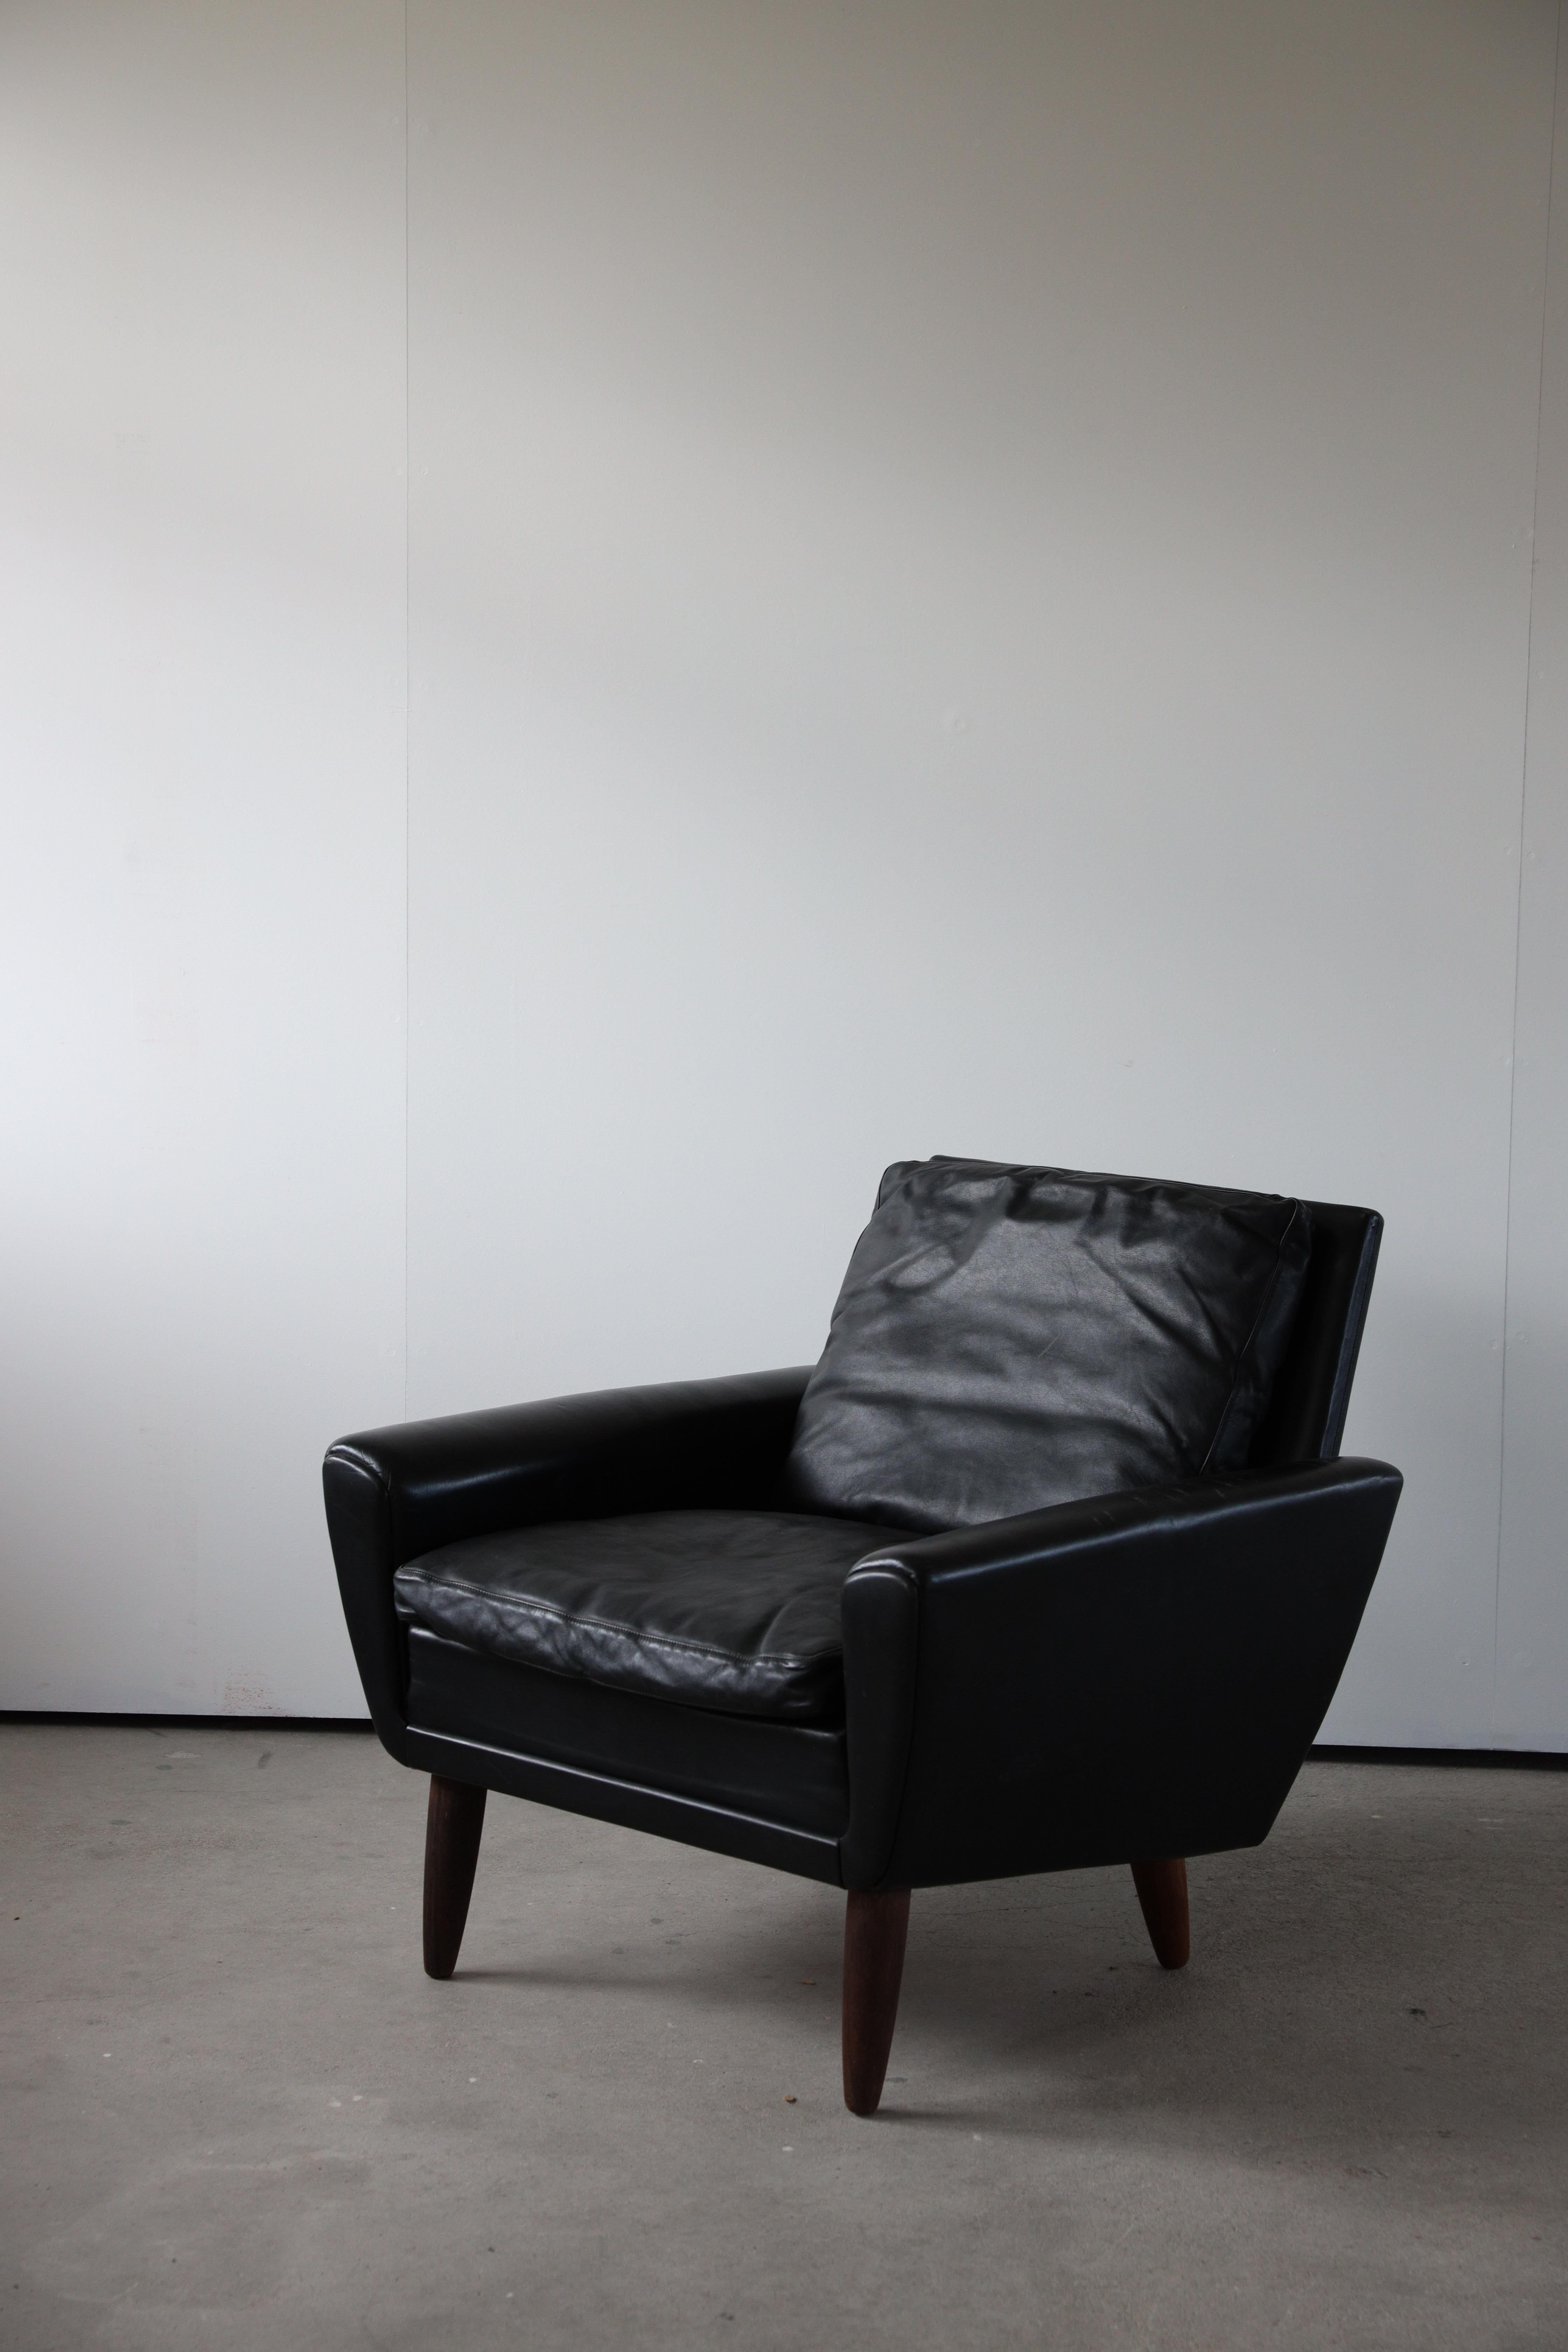 Danish modern easy chair by Georg Thams for Vejen Polstermøbelfabrik, made in black leather and rosewood legs, 1964.
The leather is in good condition showing a beautiful patina ideal for its age. The sofa sits on solid rosewood legs.